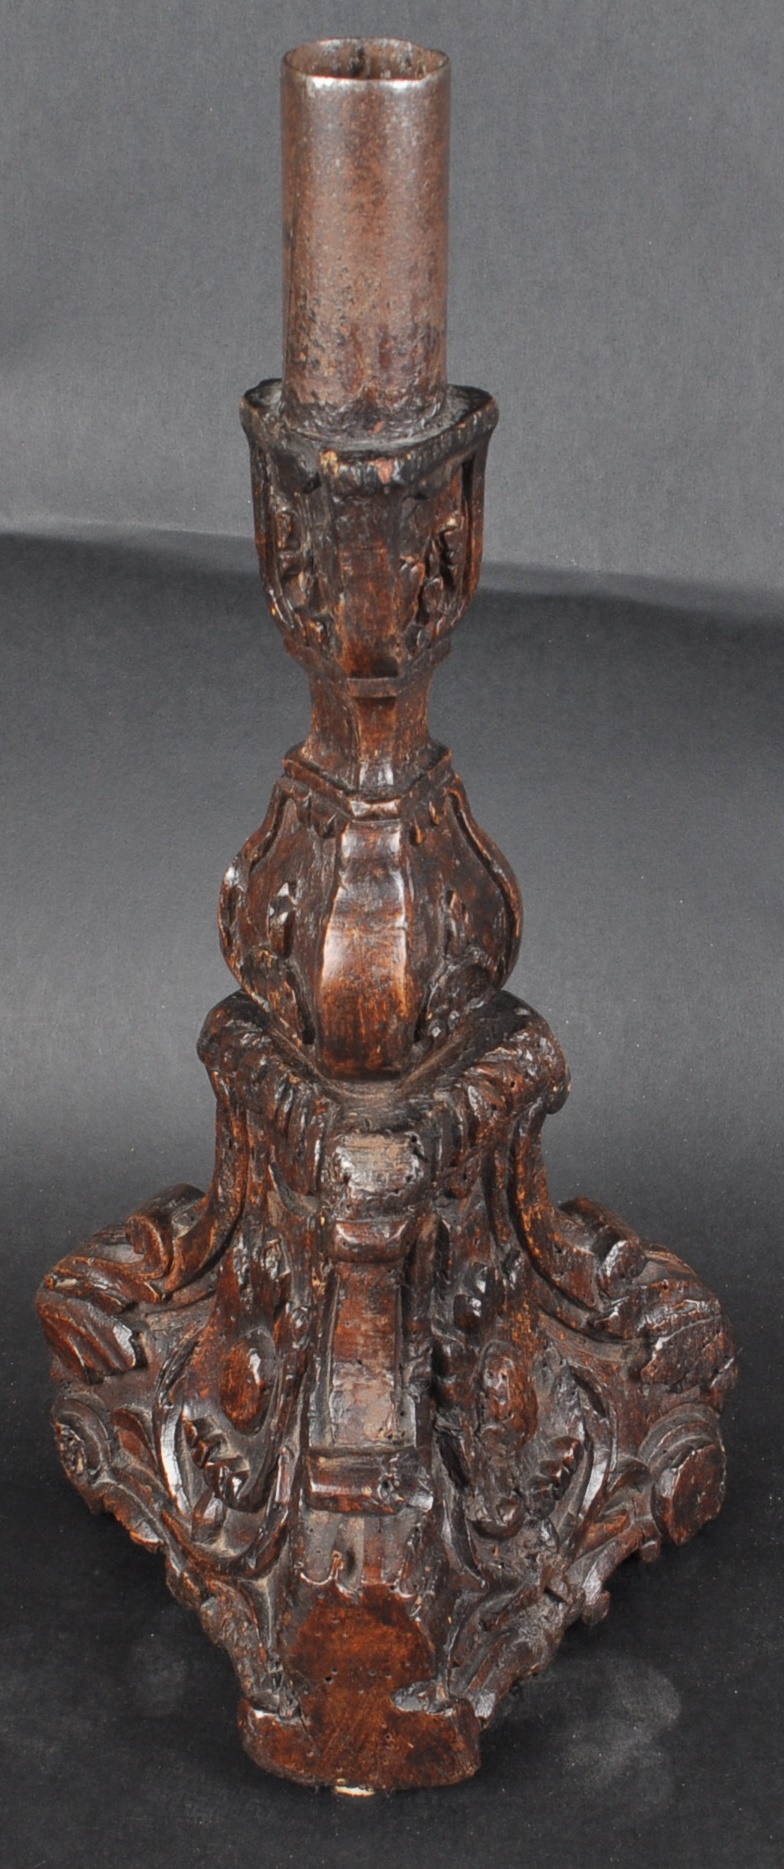 EARLY 18TH CENTURY OAK CARVED CHURCH ALTAR CANDLE HOLDER - Image 2 of 6